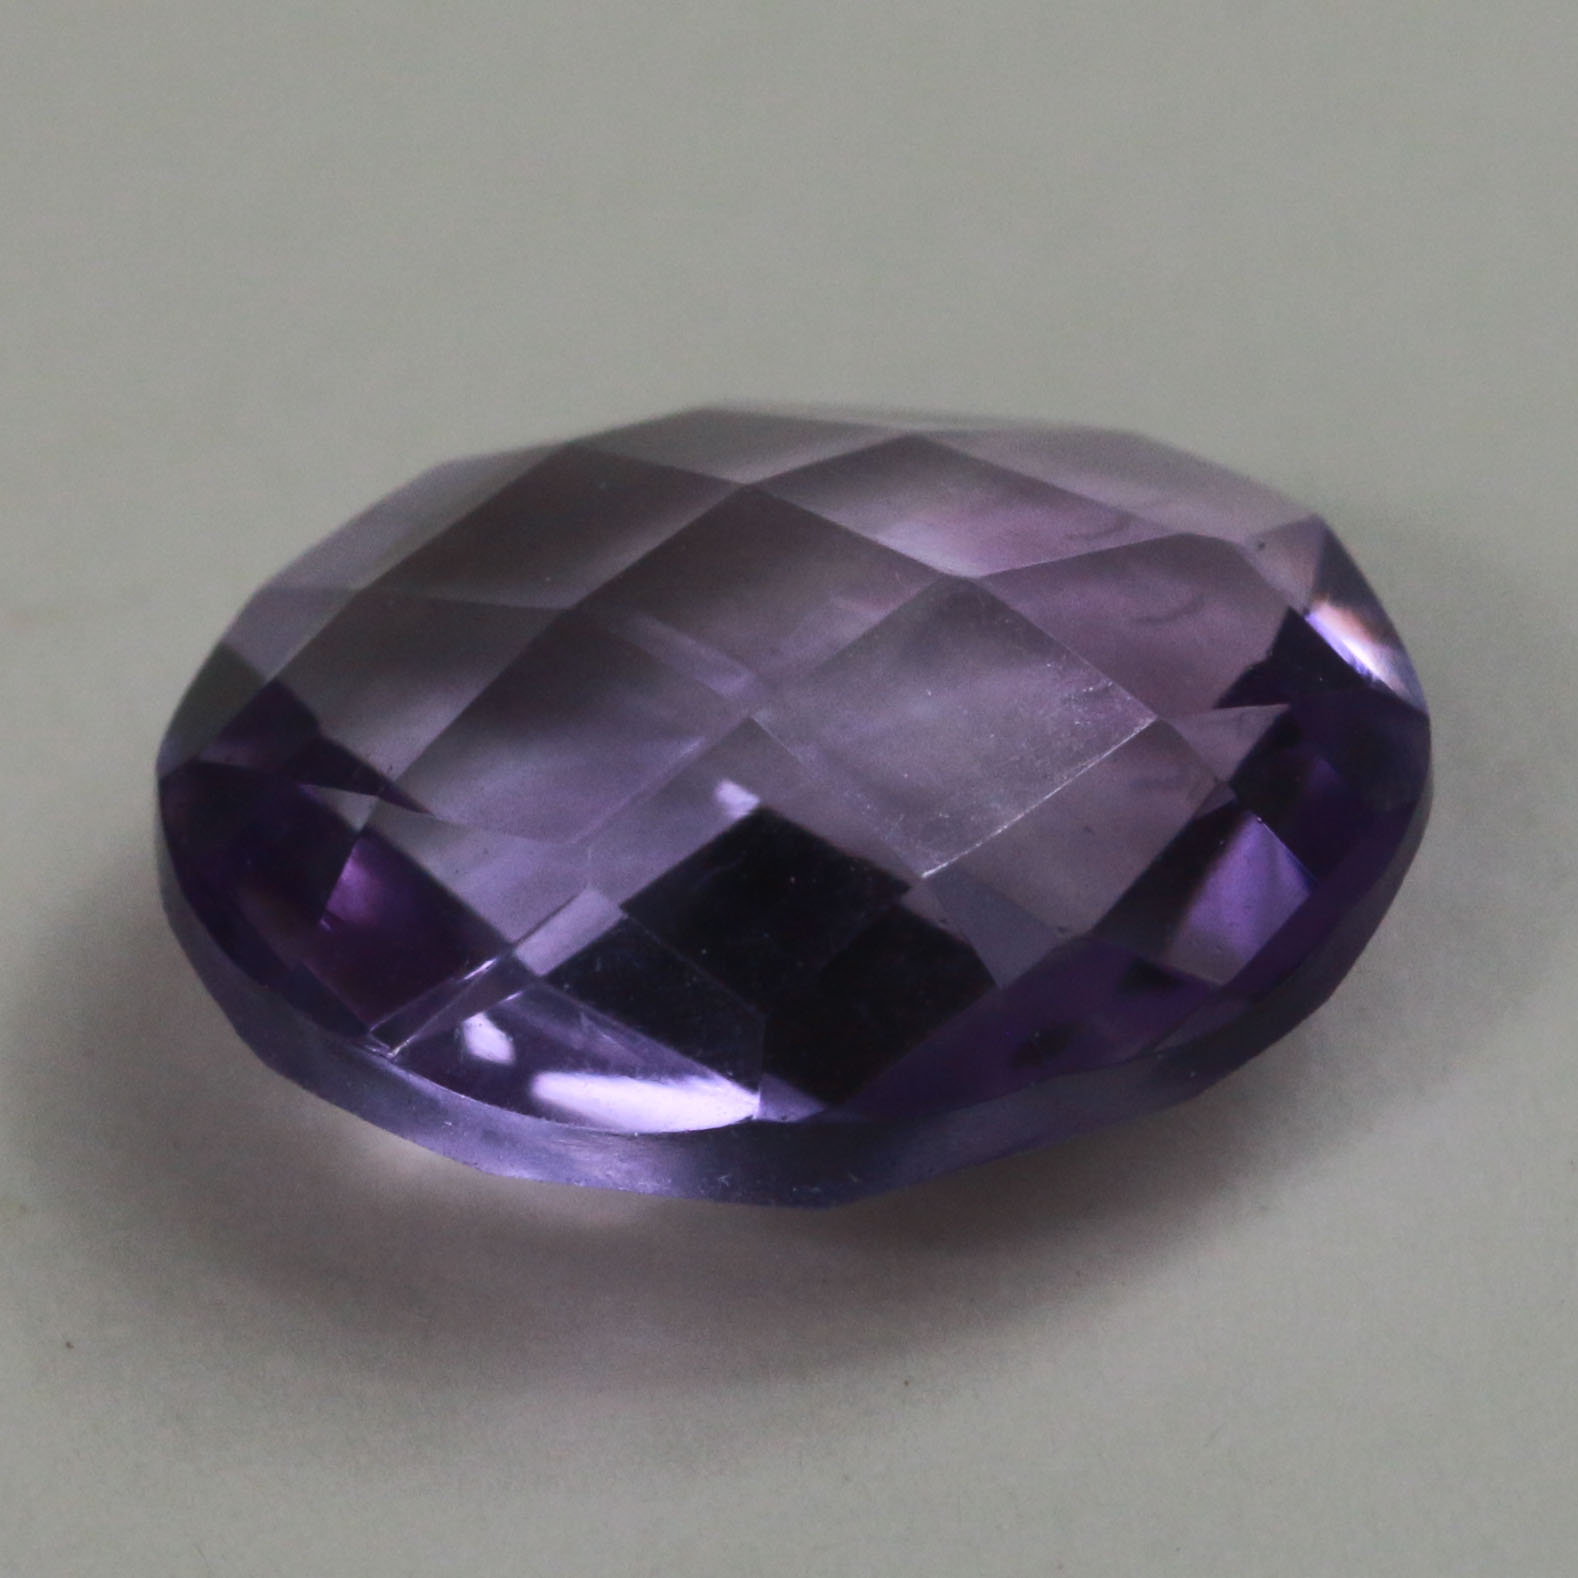 8X6 OVAL BRIOLETTE UNDRILLED AMETHYST LIGHT